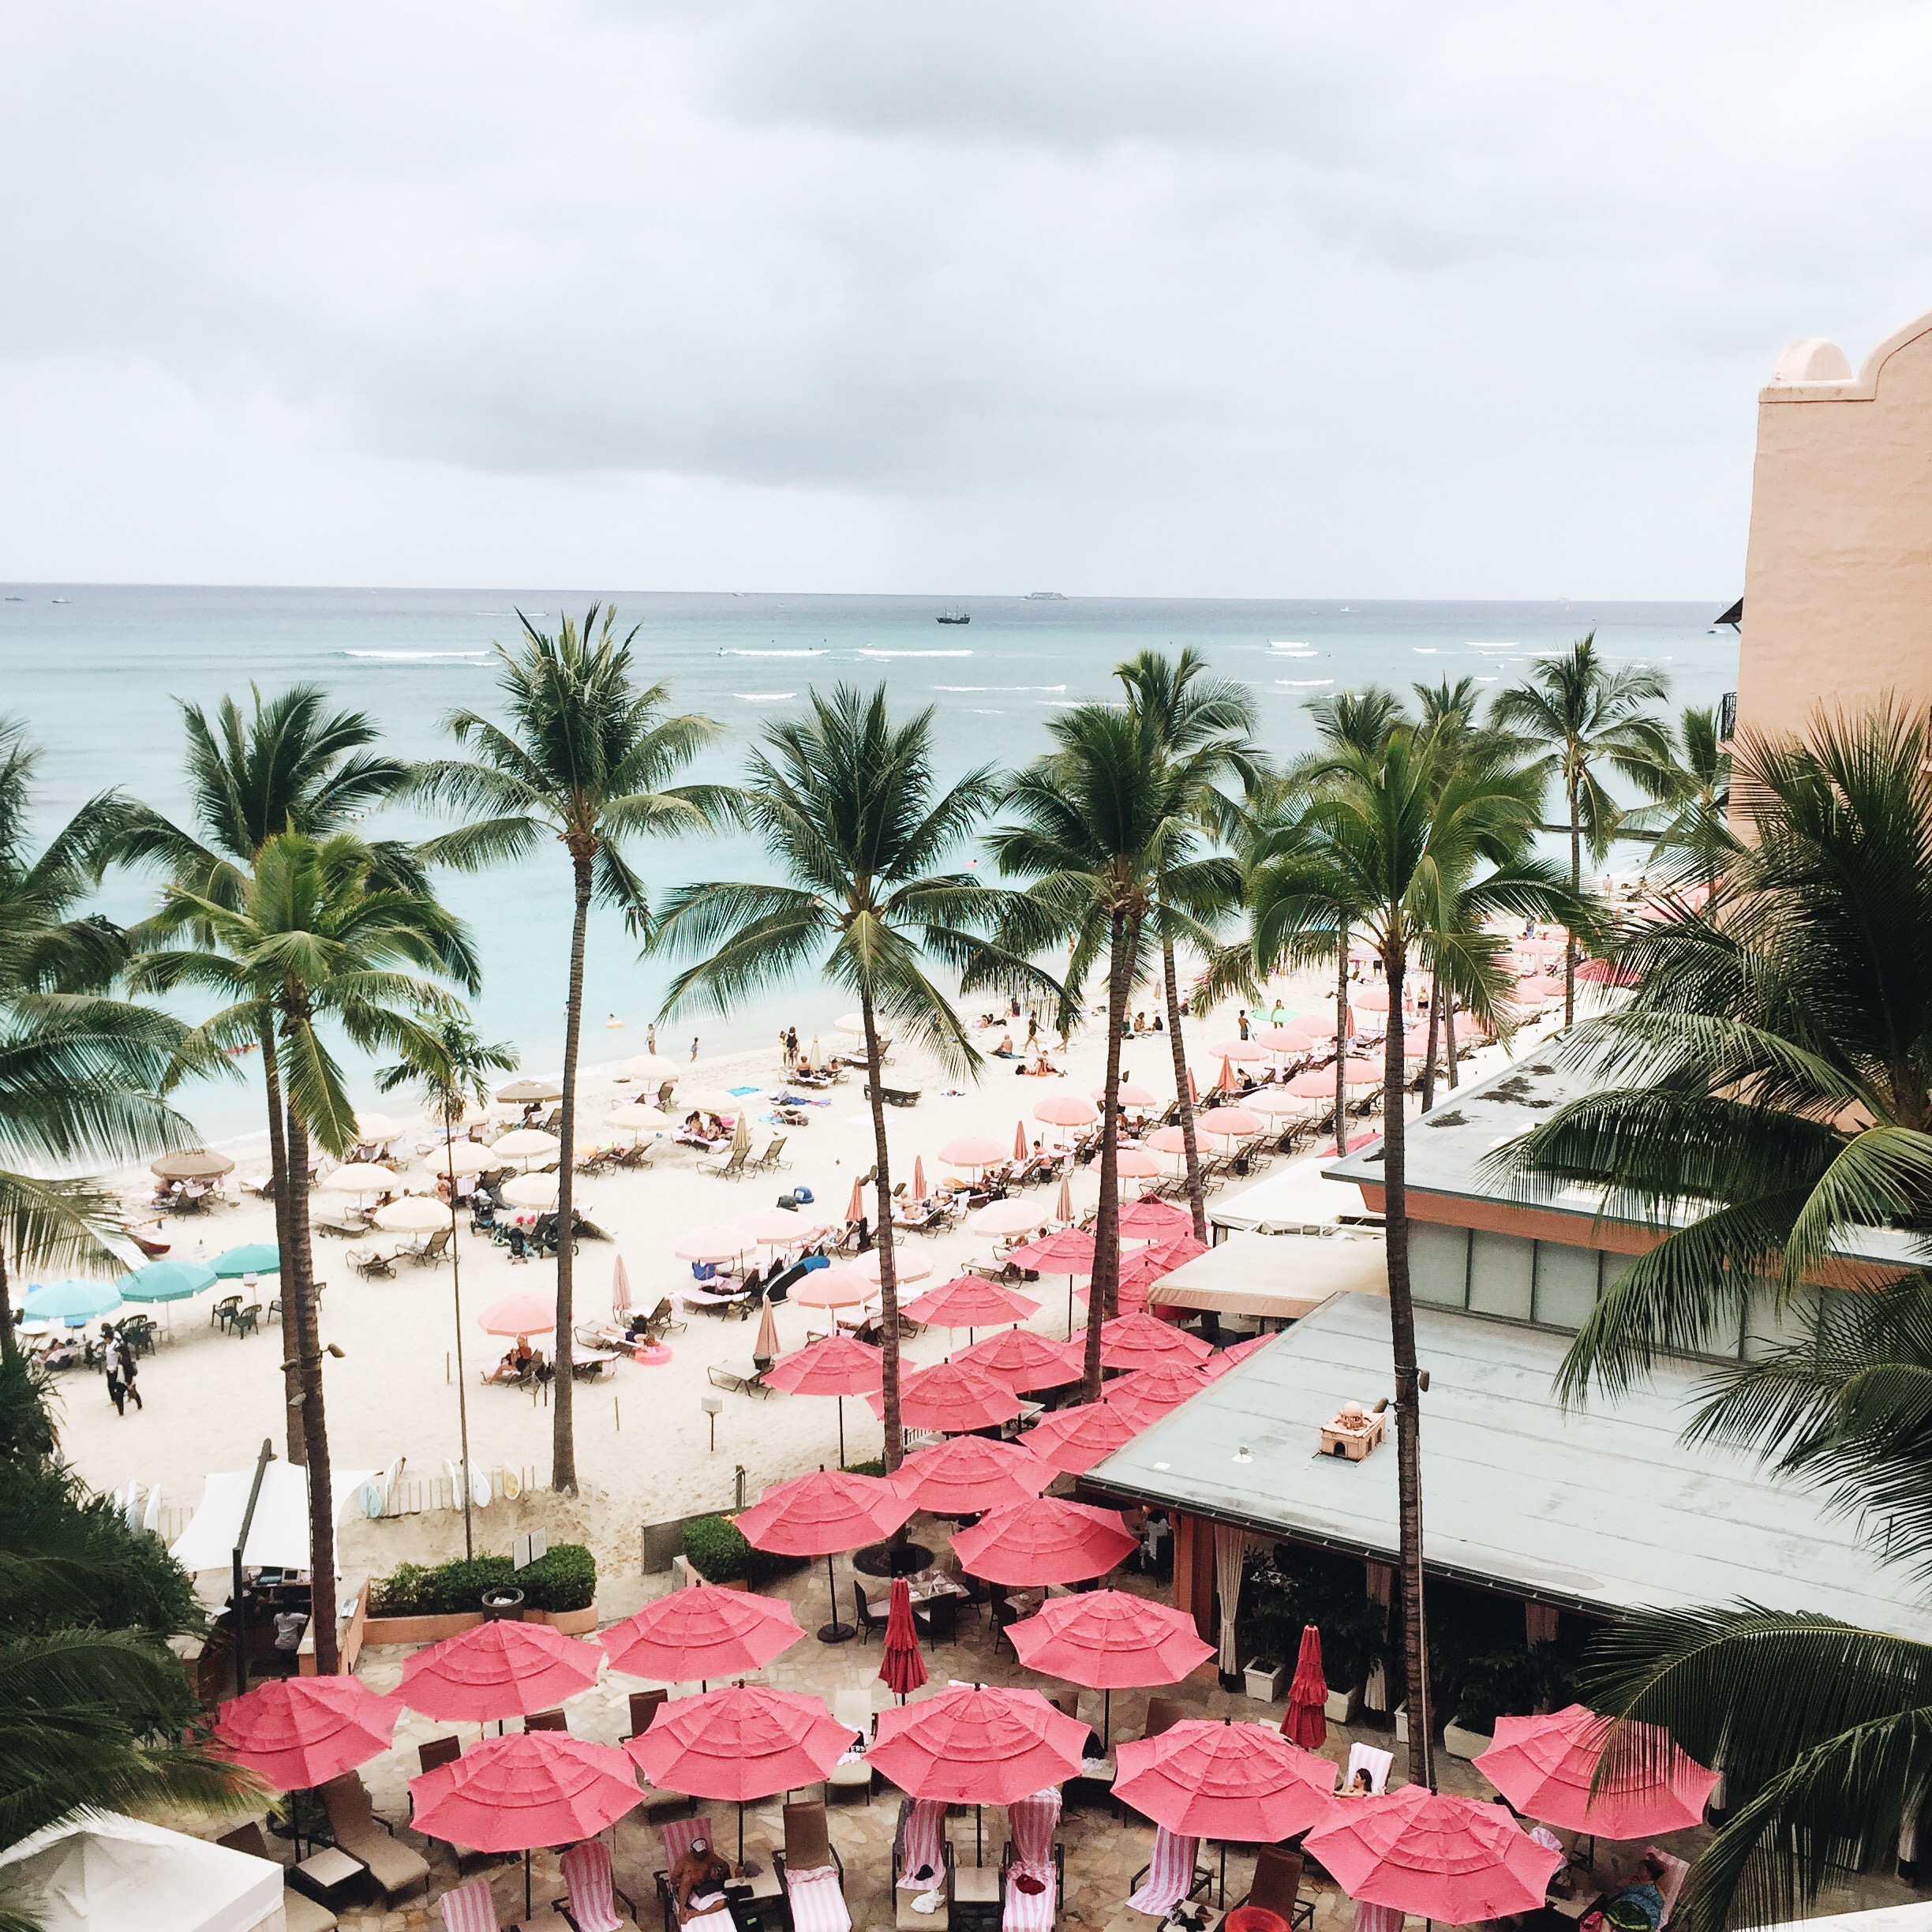 Royal Hawaiian Hotel | Pink Palace in the Pacific | Hotel Accommodations in Honolulu, Oahu | Best Places to stay on Oahu | Travel Guide to Oahu via @elanaloo + elanaloo.com